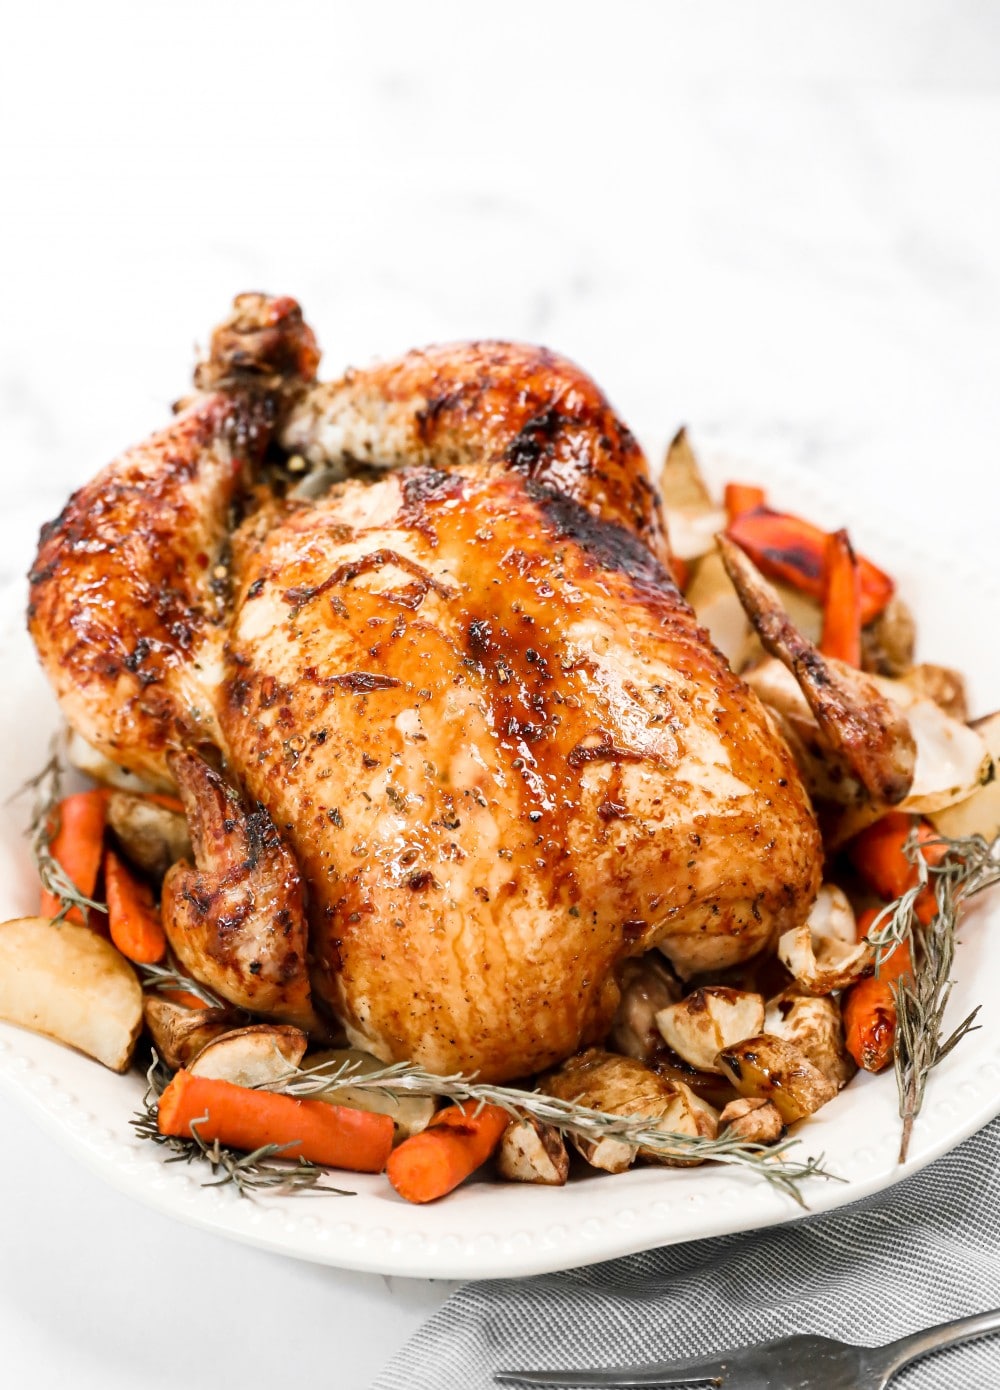 a whole honey roasted chicken on a platter with herbs and carrots